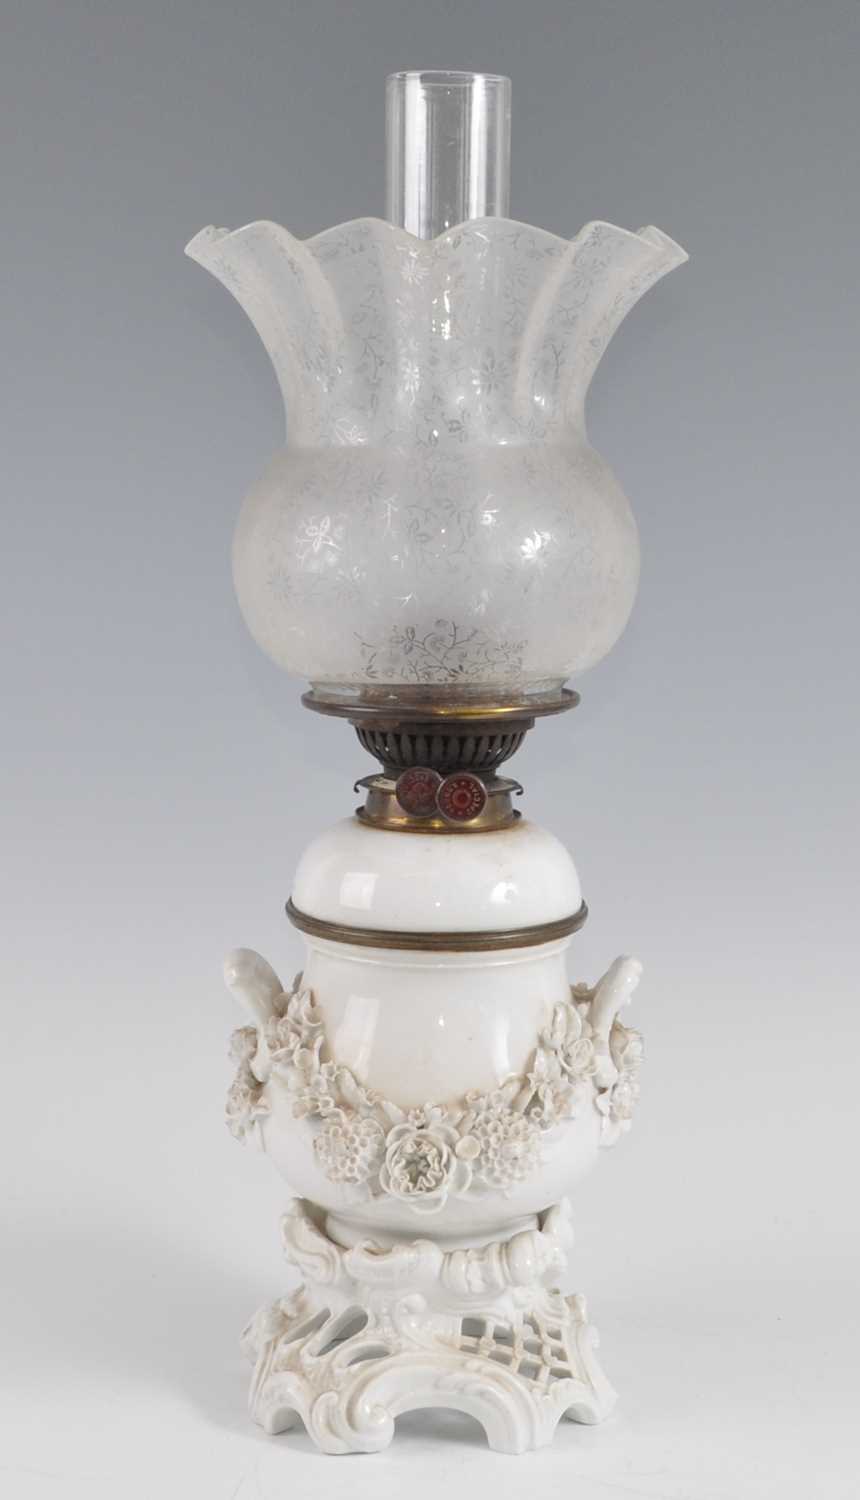 A 19th century blanc de chine porcelain oil lamp, the acid etched shade above a floral encrusted